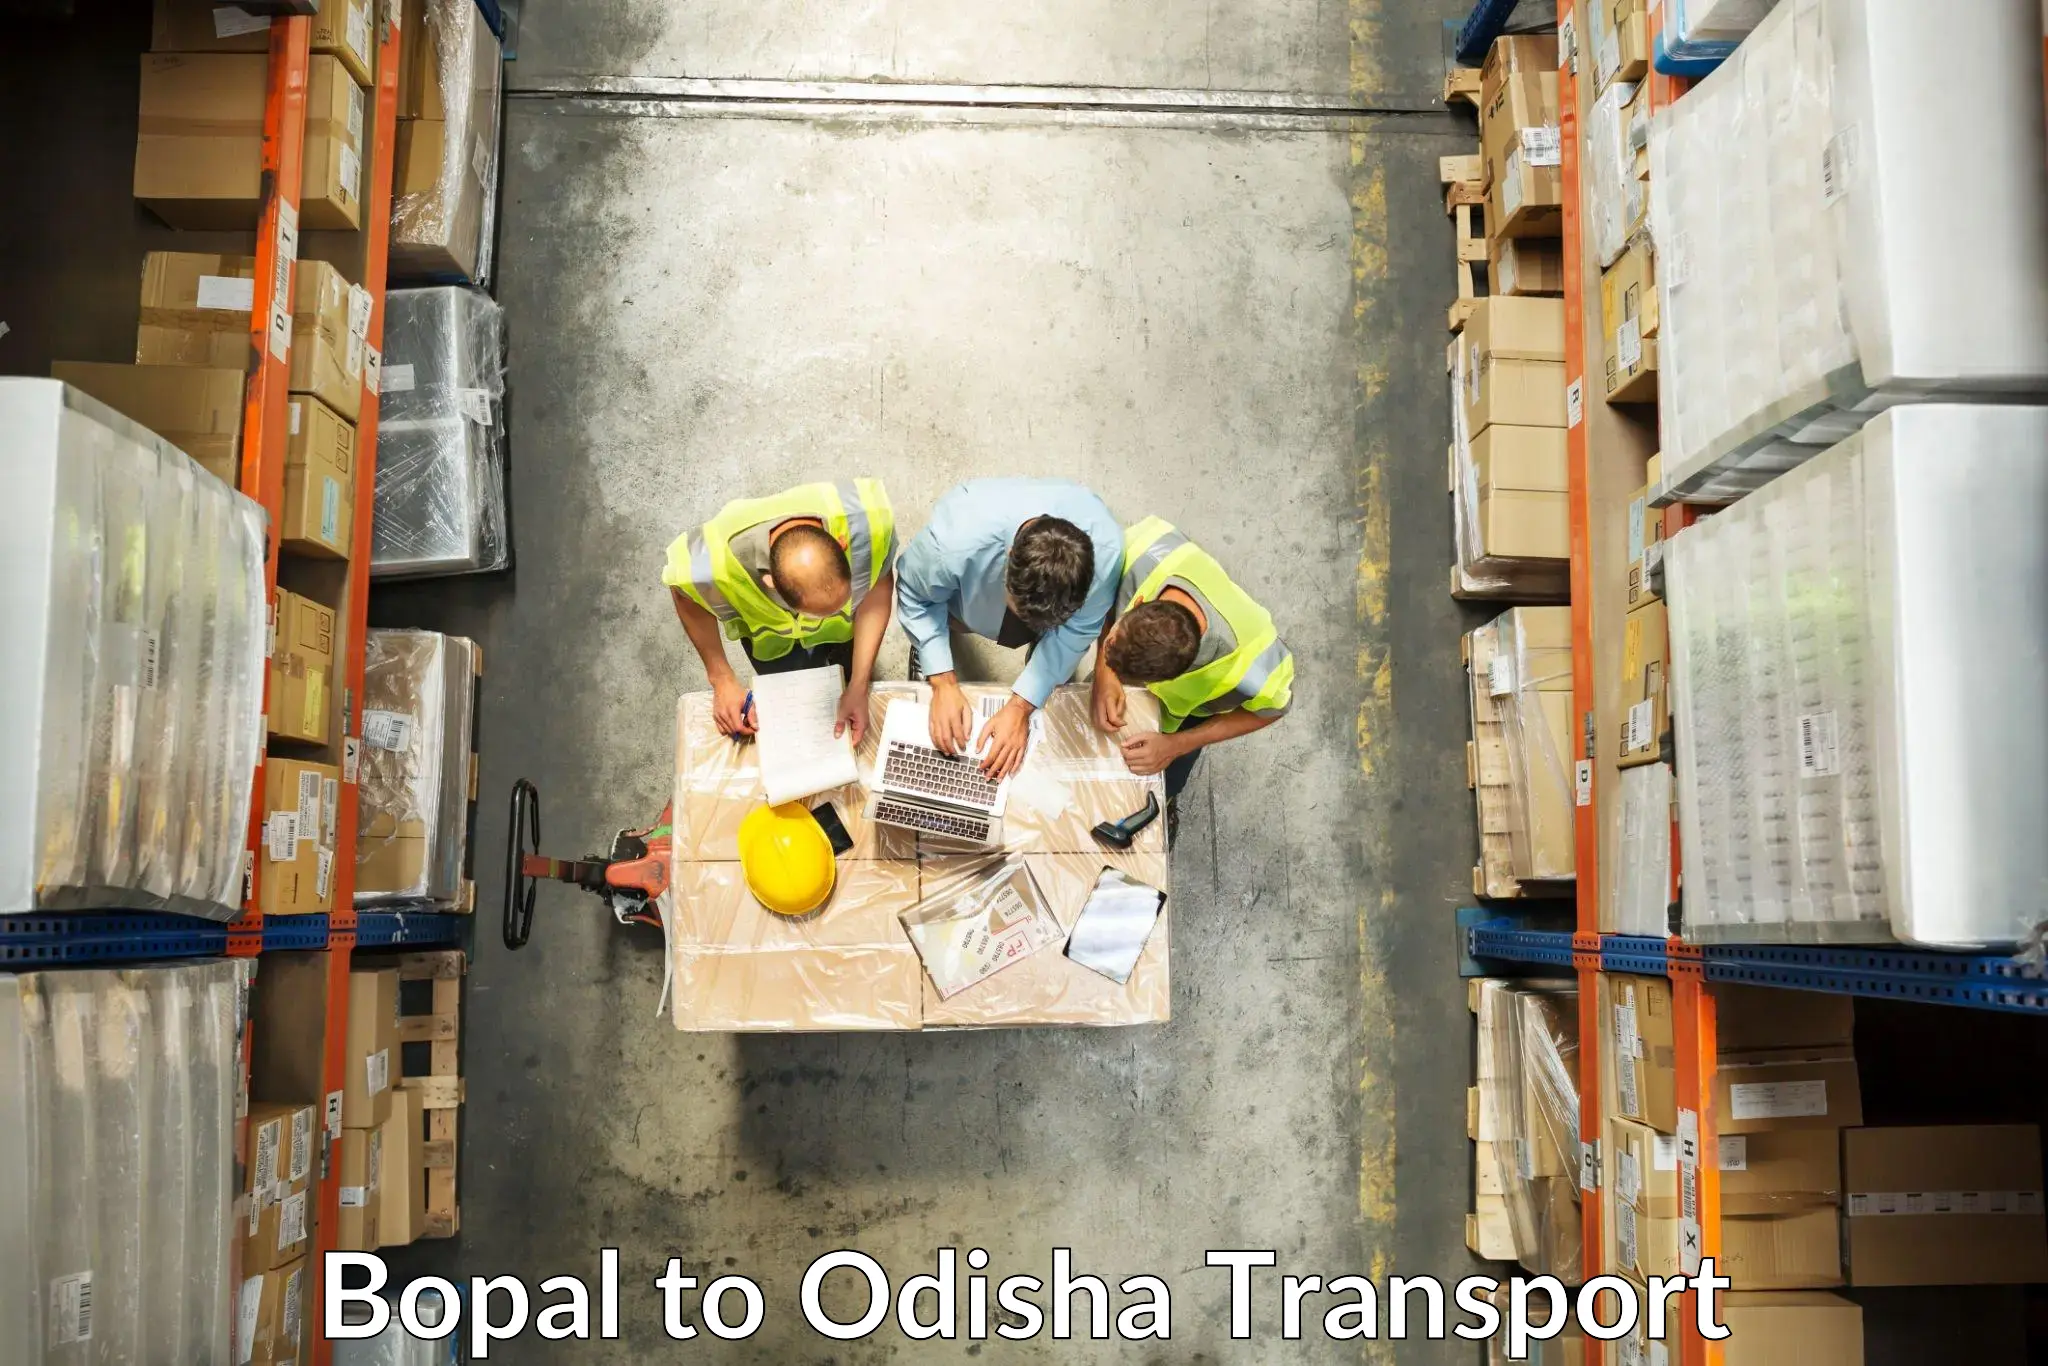 Truck transport companies in India in Bopal to Mayurbhanj